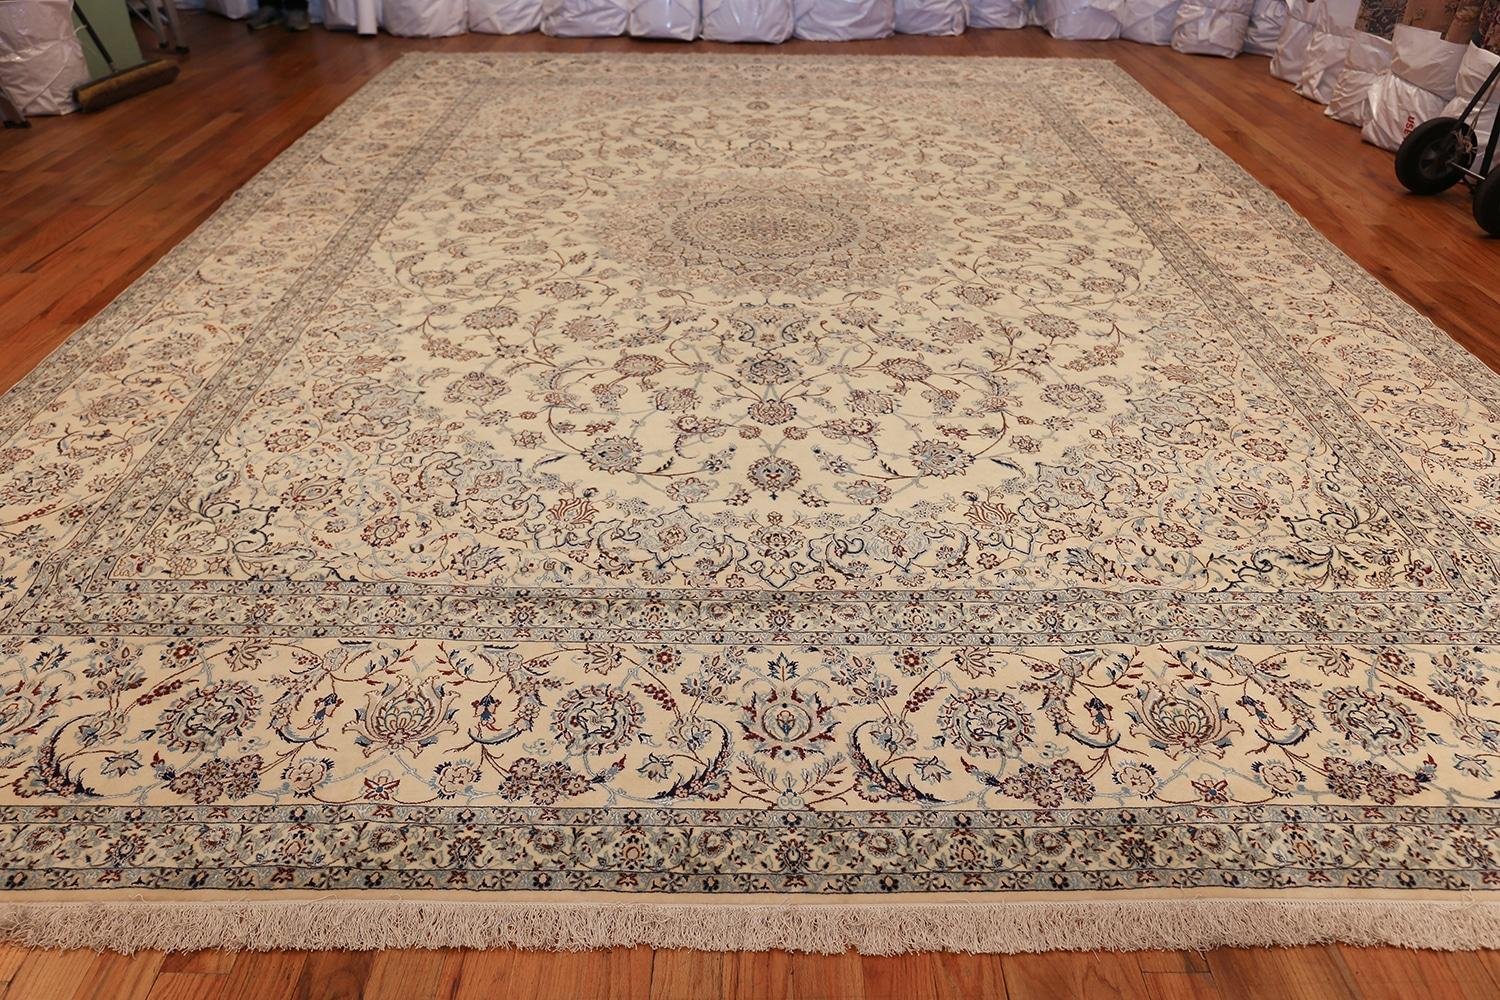 Floral Large Silk and Wool Vintage Nain Persian Rug. Size: 11 ft 6 in x 17 ft 8